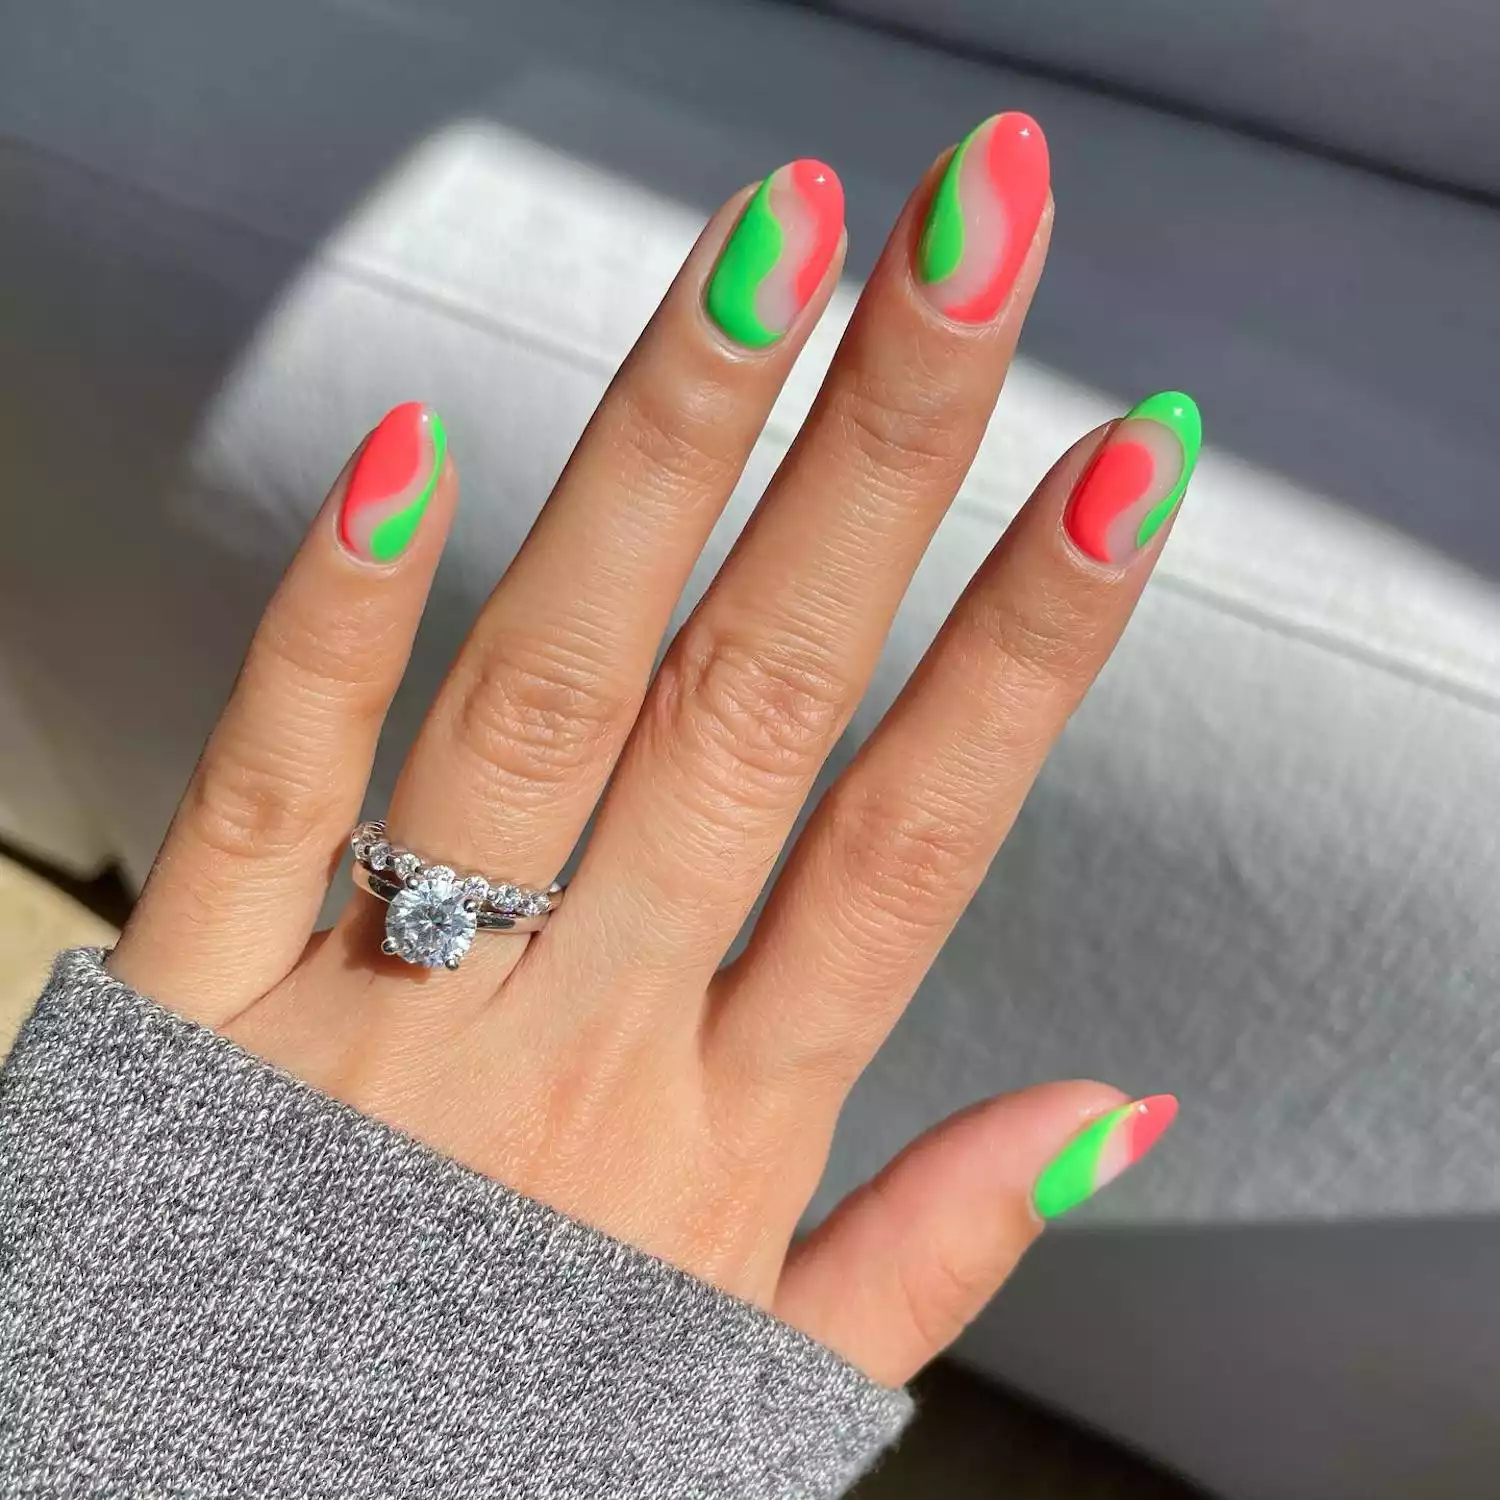 Abstract negative space manicure with watermelon pink and neon green colors